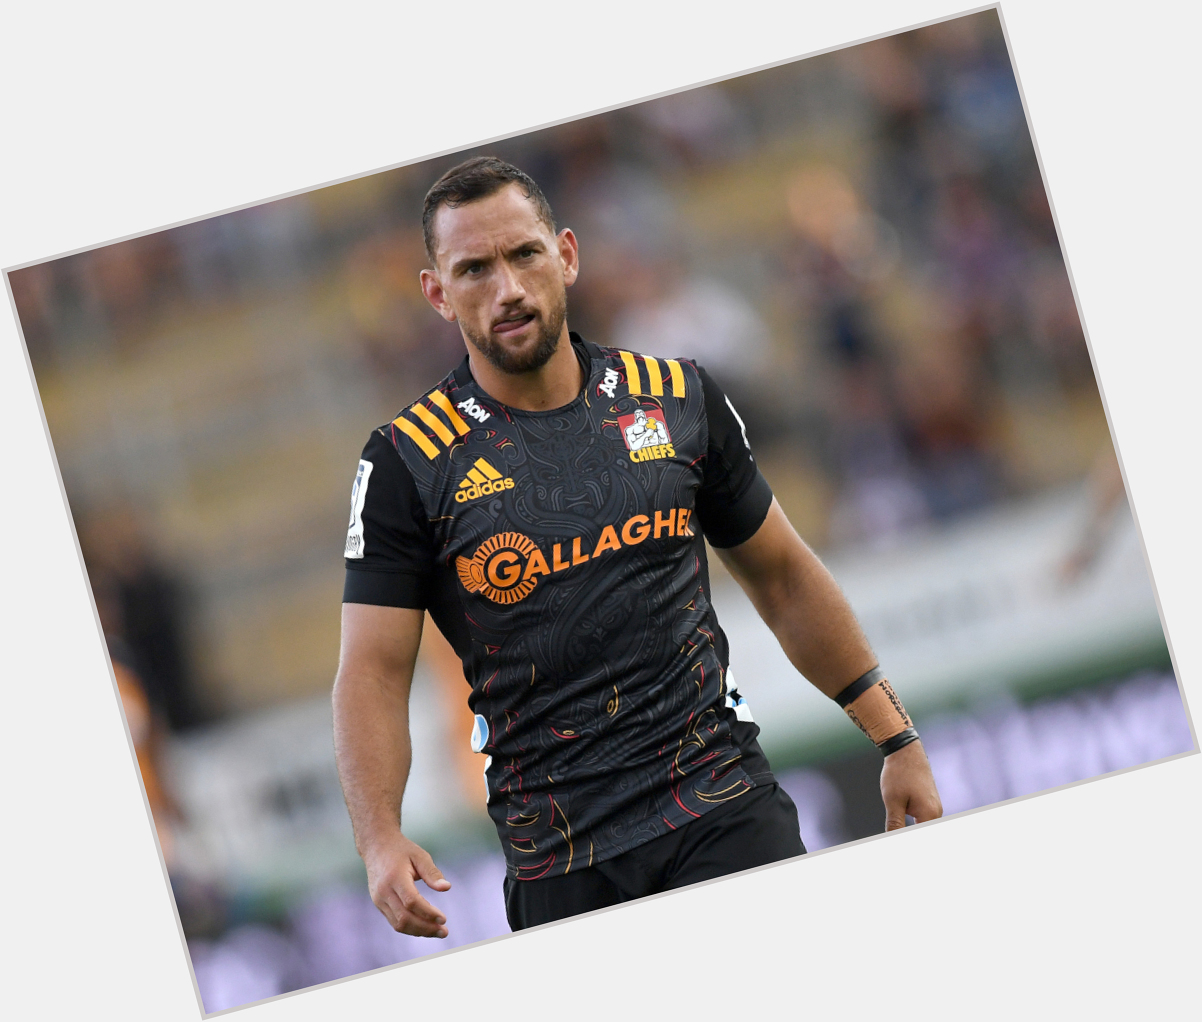  Happy 32nd birthday to 50-times capped All Blacks fly-half Aaron Cruden! 